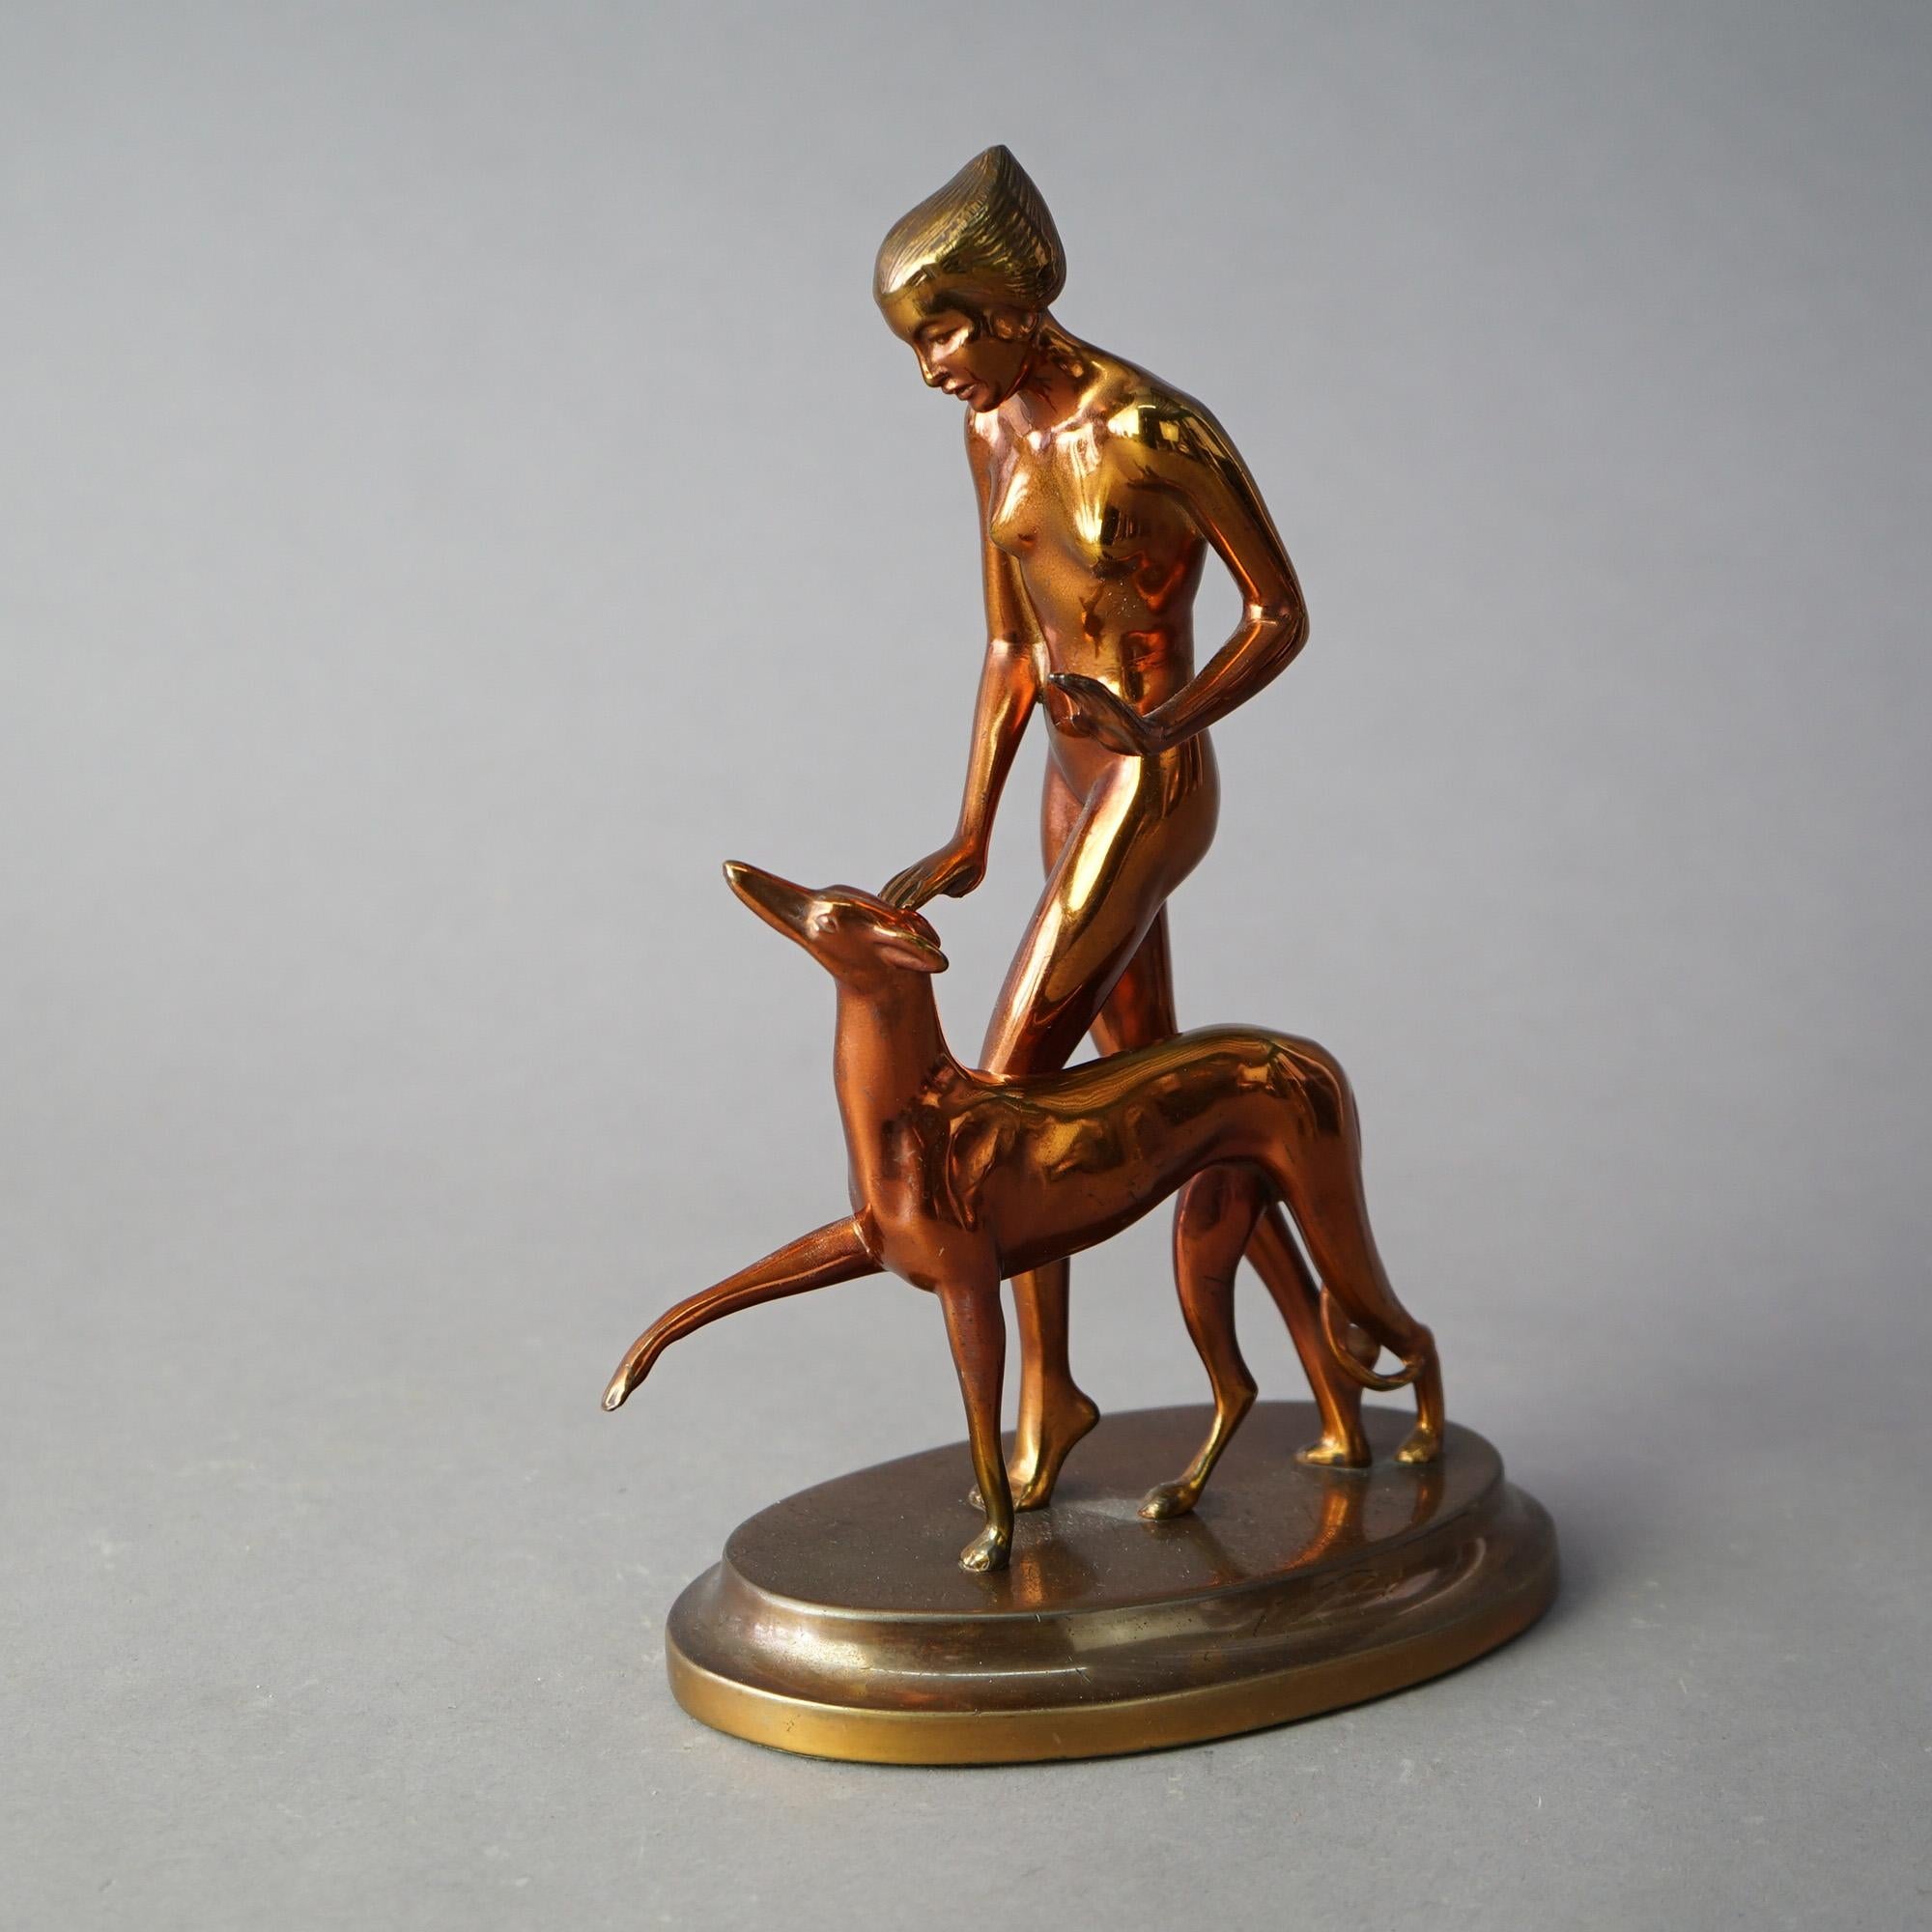 An antique Art Deco Ronson Georgian grouping offers gold metal construction and depicts a nude woman and her dog (Whippet), circa 1920

Measures - 11.25